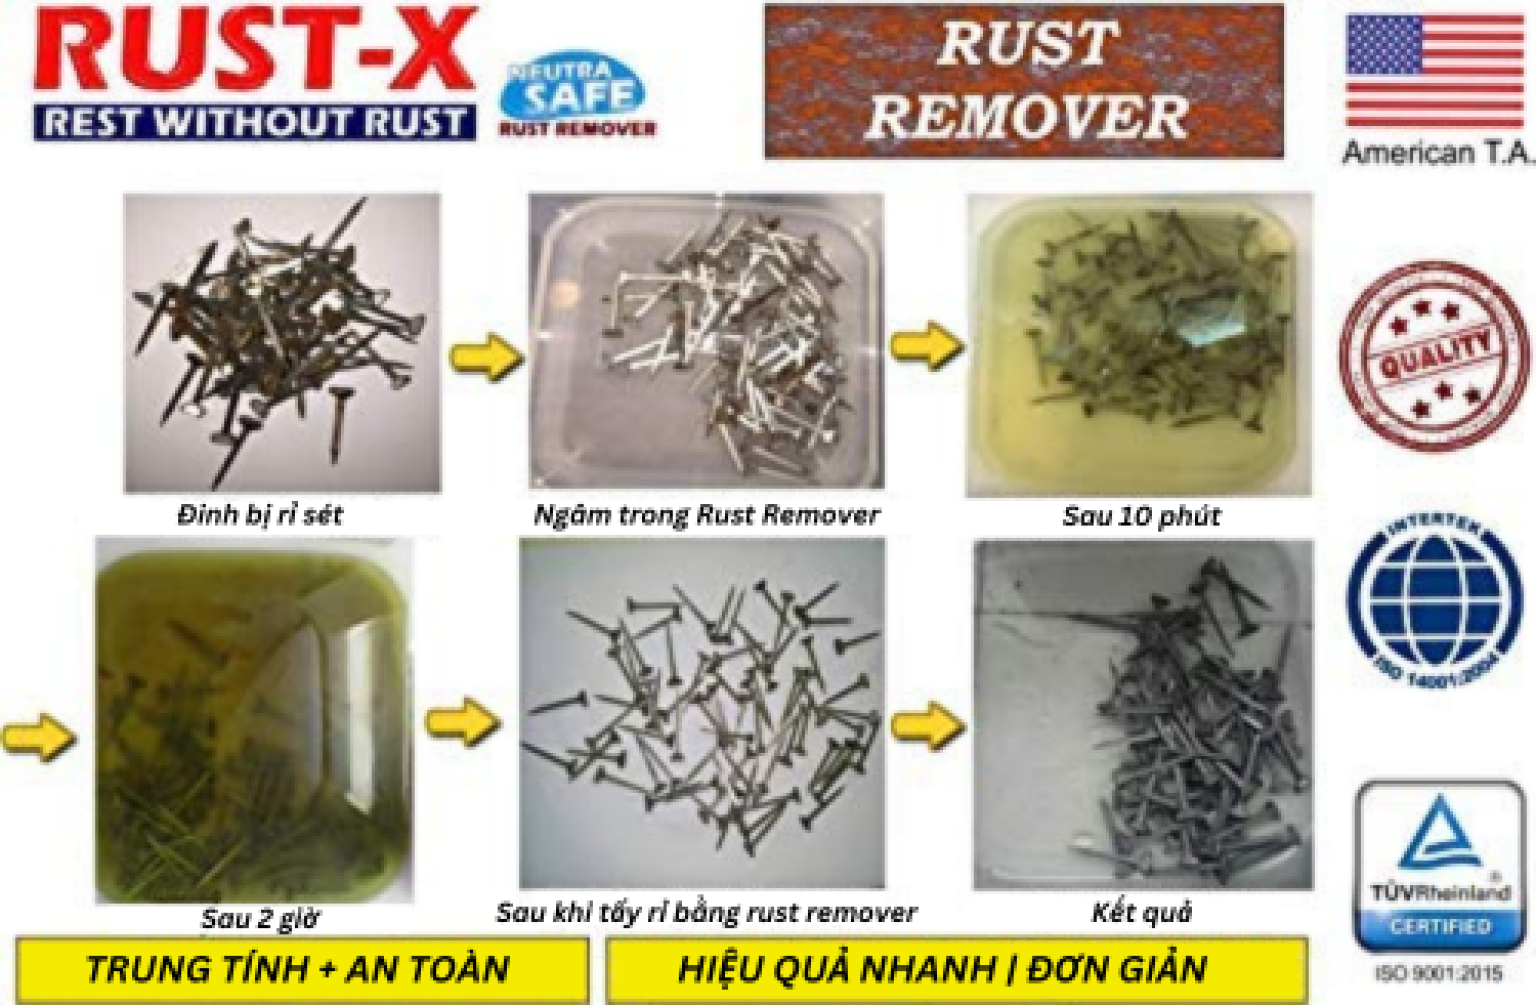 Dung-Dich-Tay-Gi-Set-Rust-Remover-Rust-X-1536x1005